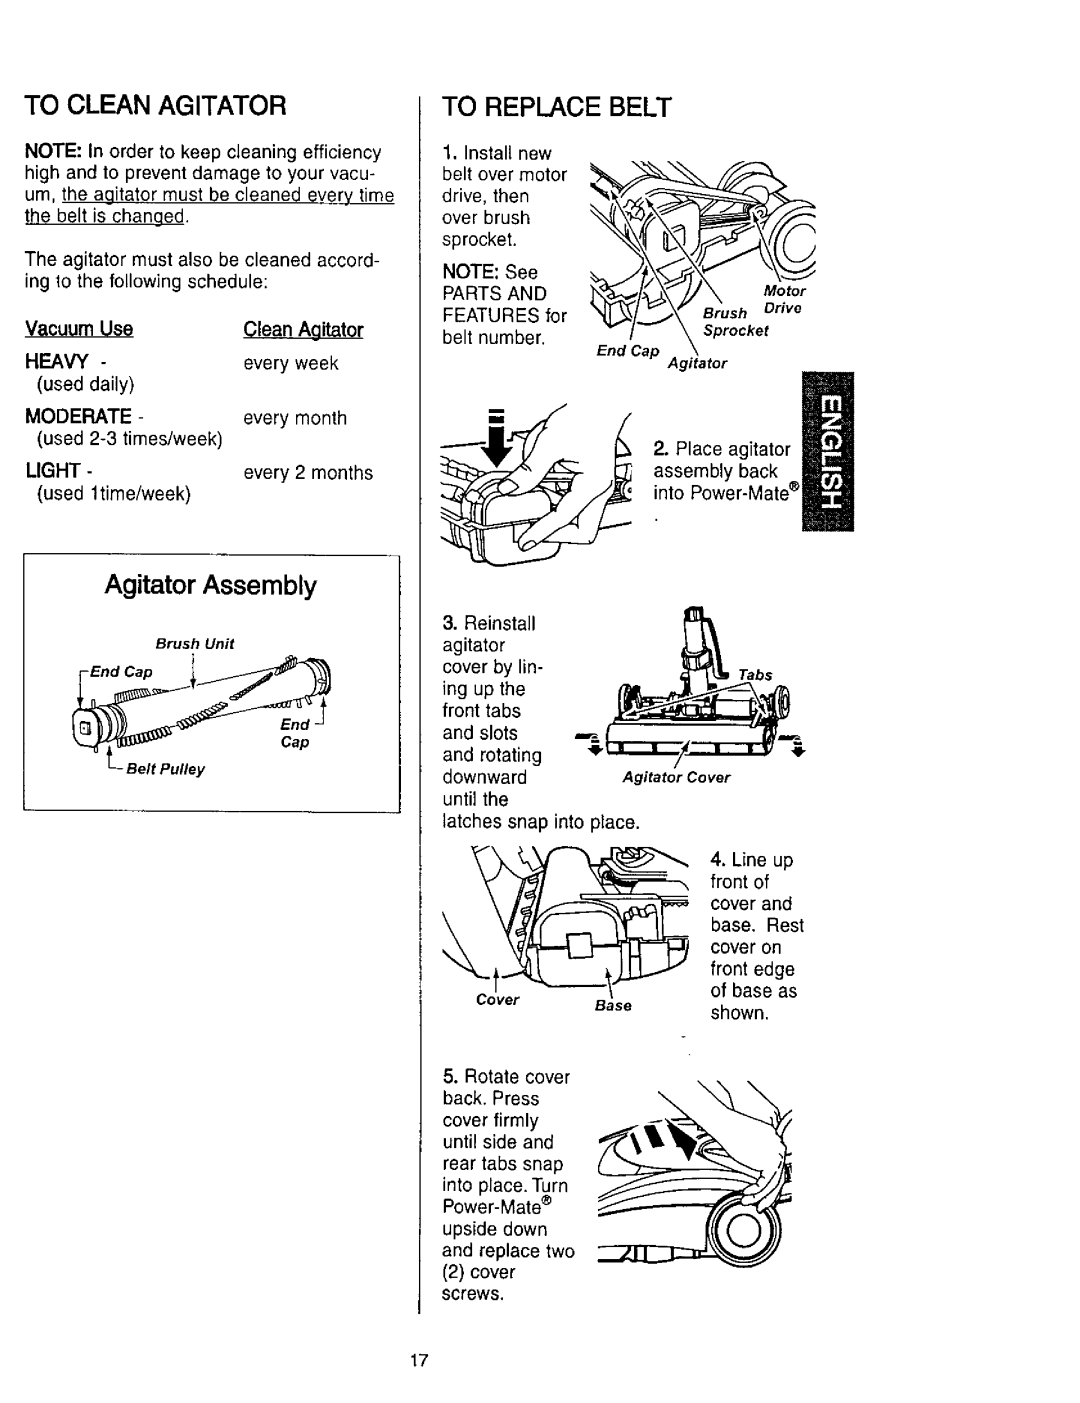 Kenmore 116.23637C owner manual To Clean Agitator, To Replace Belt, Agitator Assembly, Vacuum, Heavy, used, daily, Moderate 